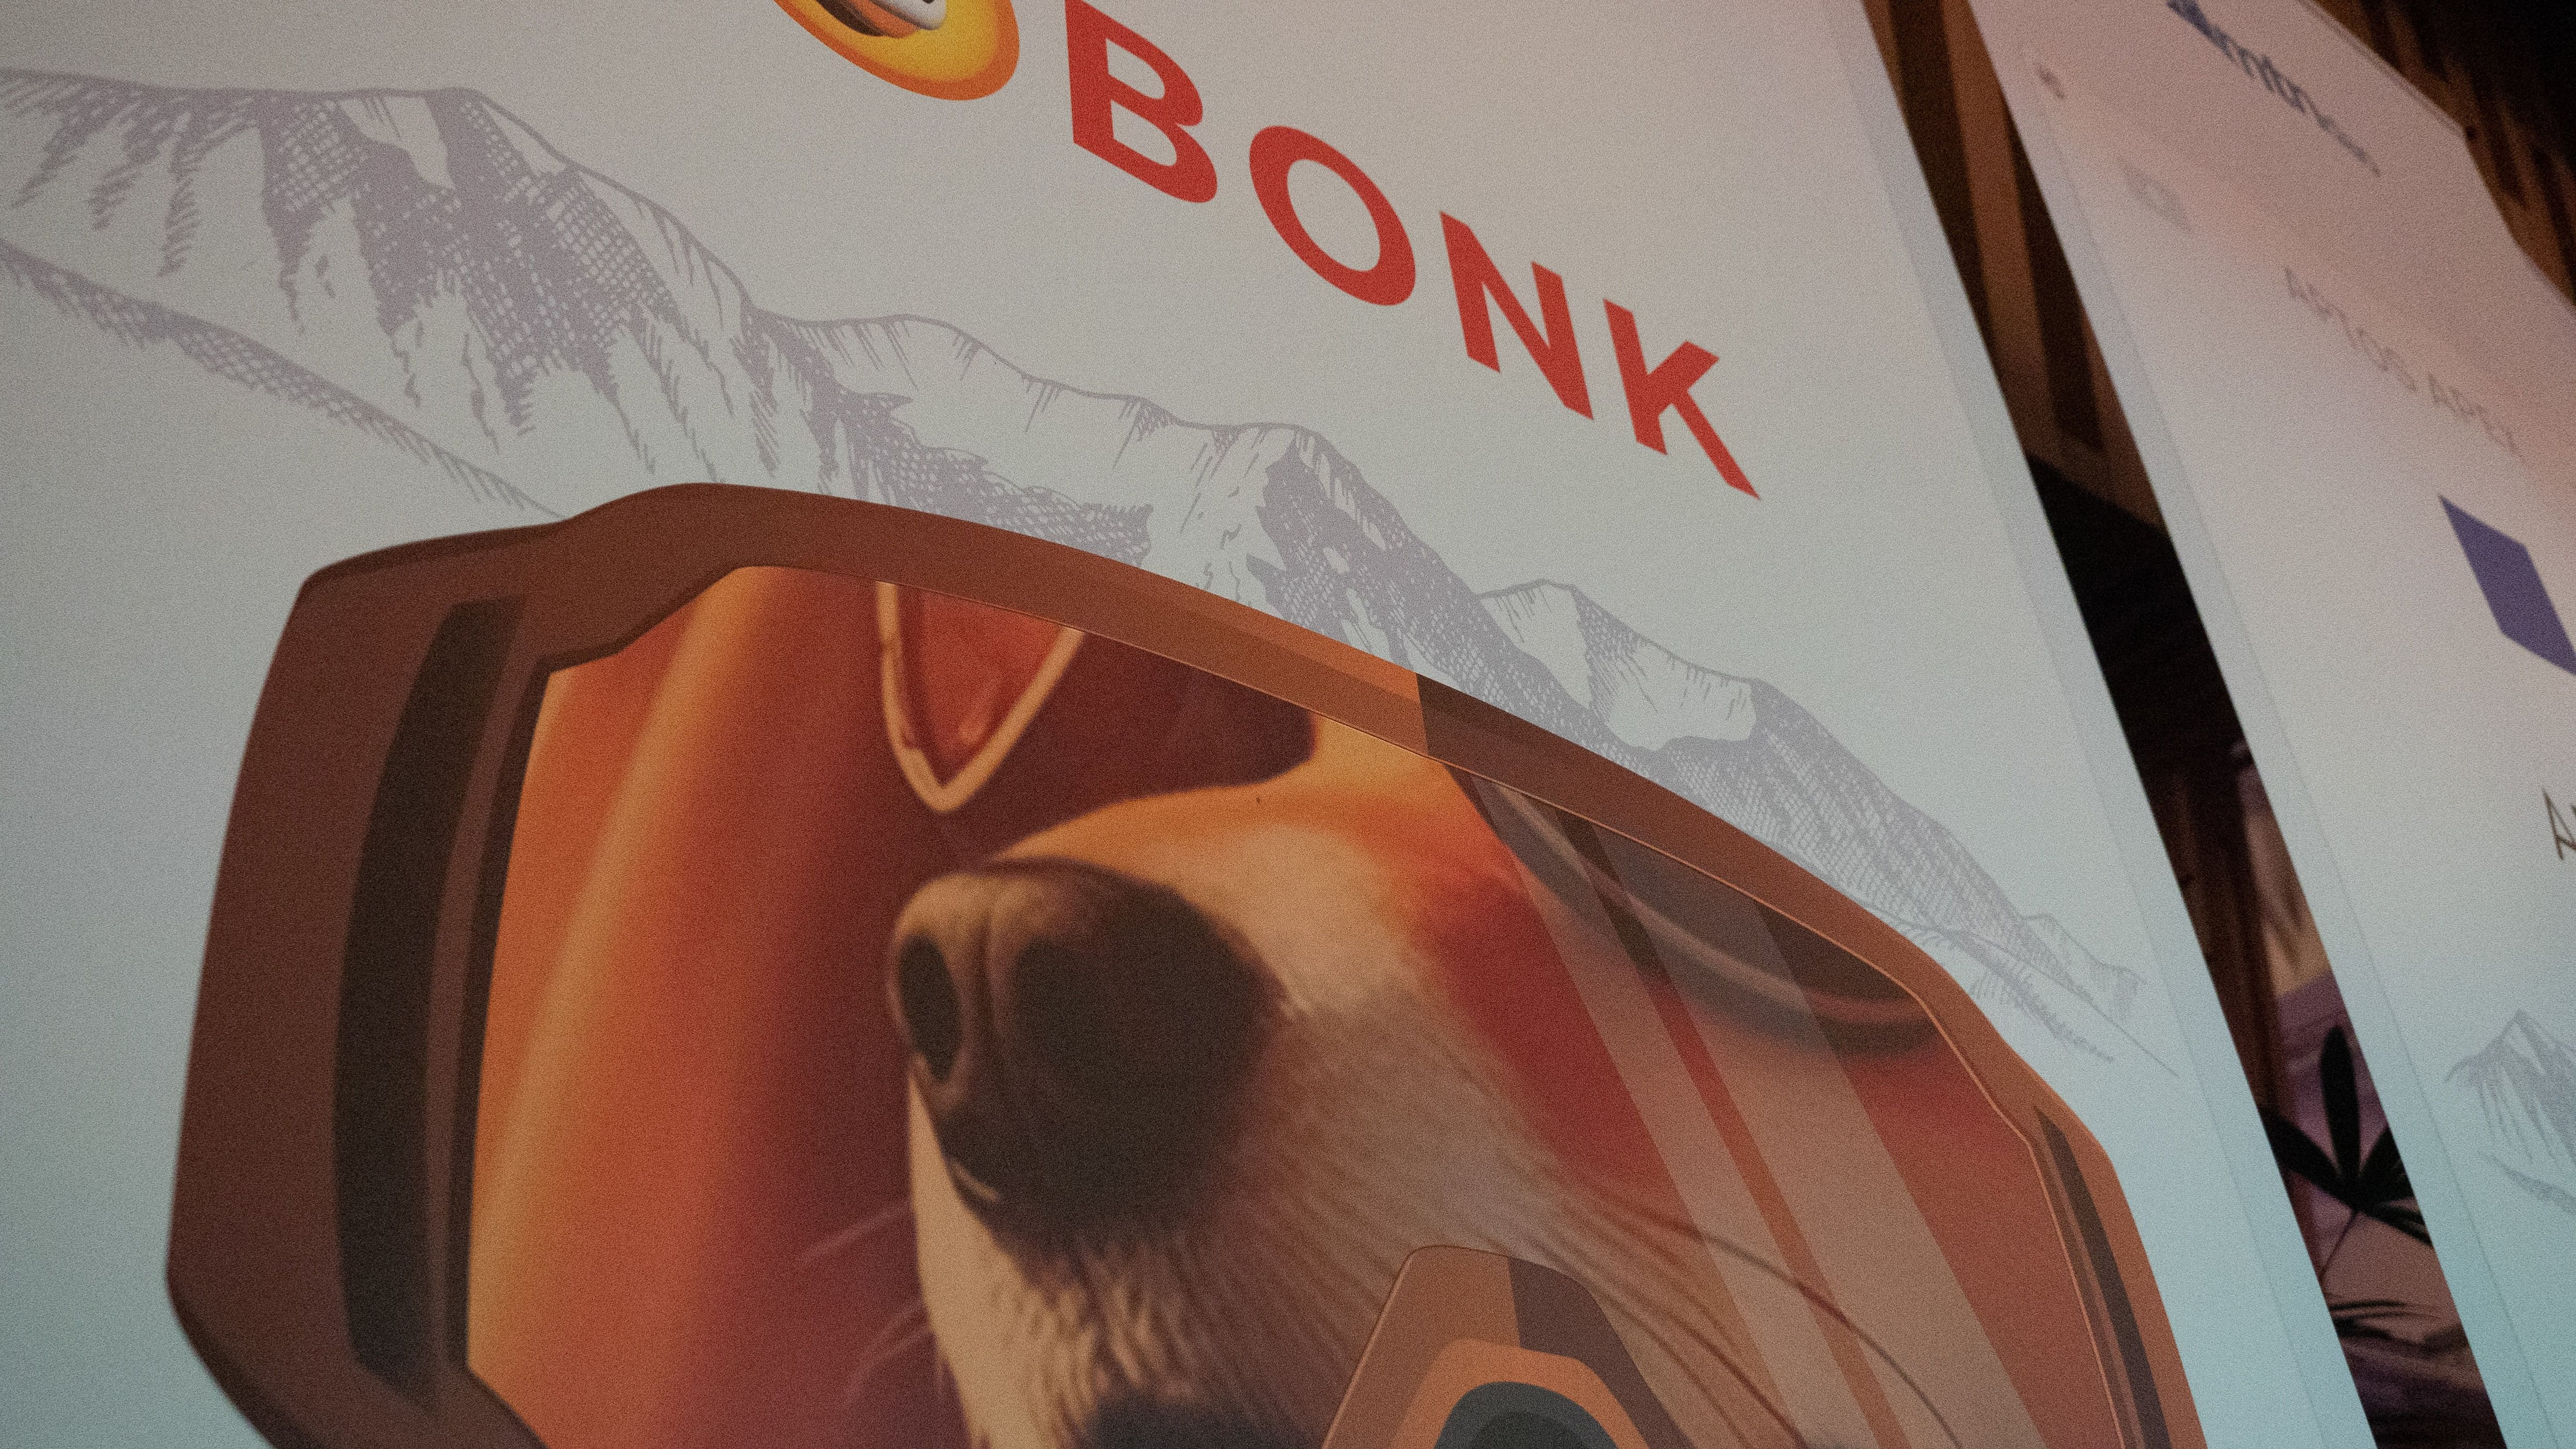 A BONK ad in Salt Lake City (Danny Nelson/CoinDesk)